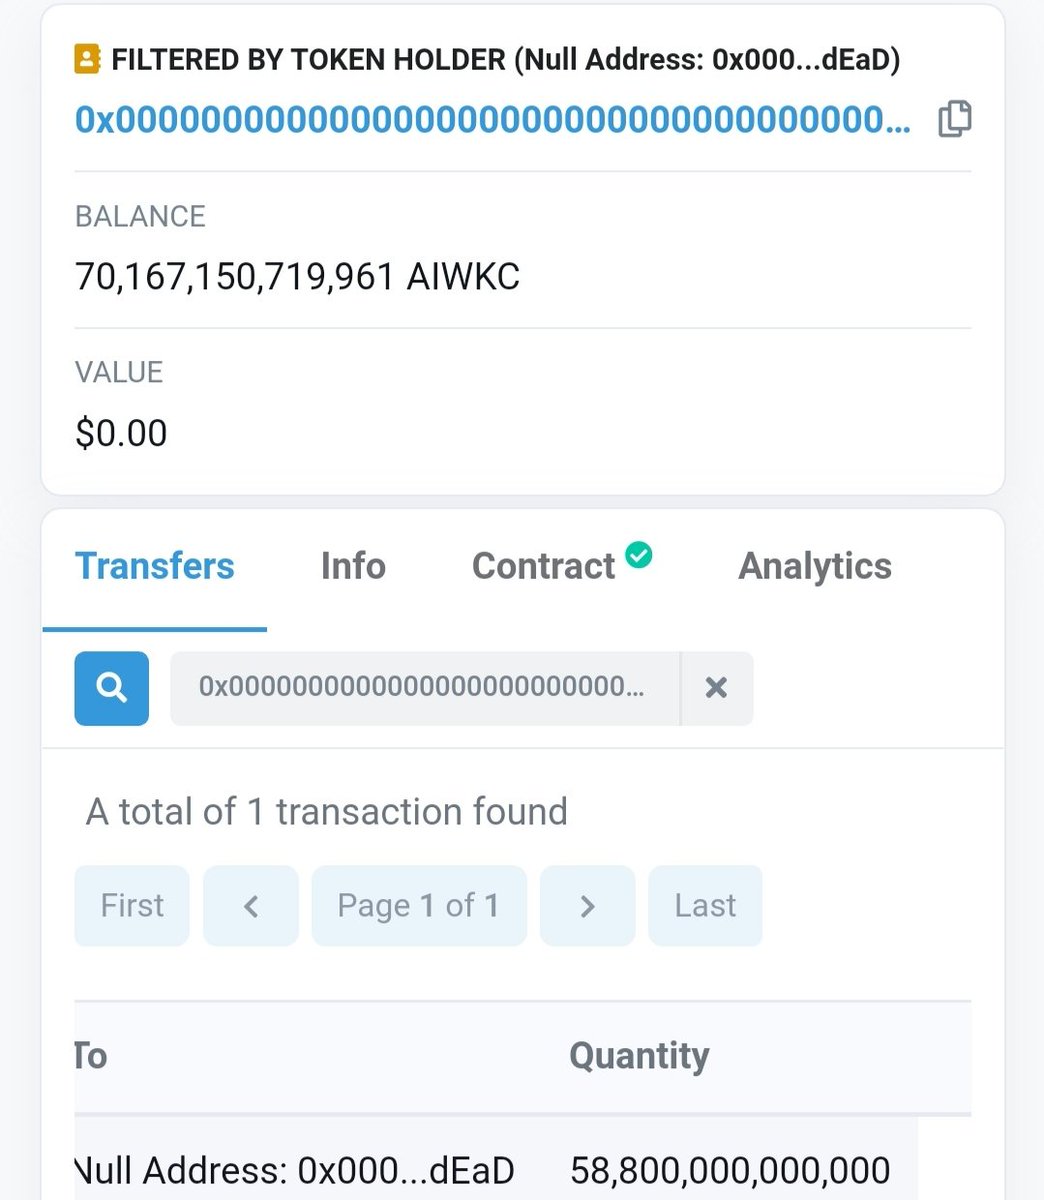 I bet you didn't know that the amount of $AIWKC in the 0x00...deaD burn address has increased to 70T+ within 7 days of launch from the initial 60T sent to the address. This will keep increasing, therefore reducing the circulating supply forever due to reflections. HODL #AIWKC